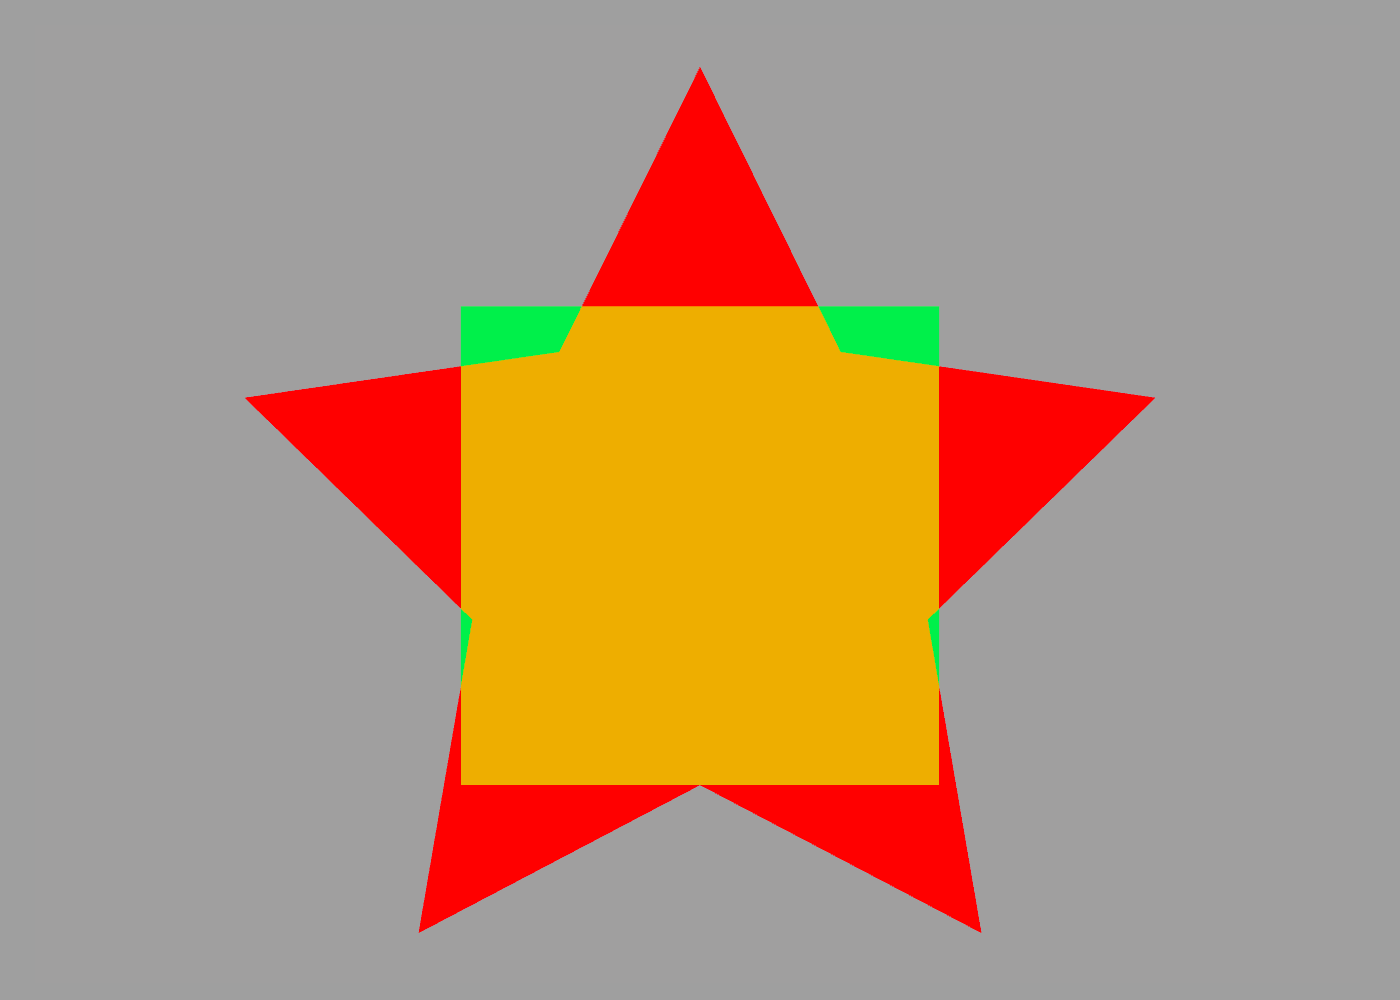 Star with unit cube